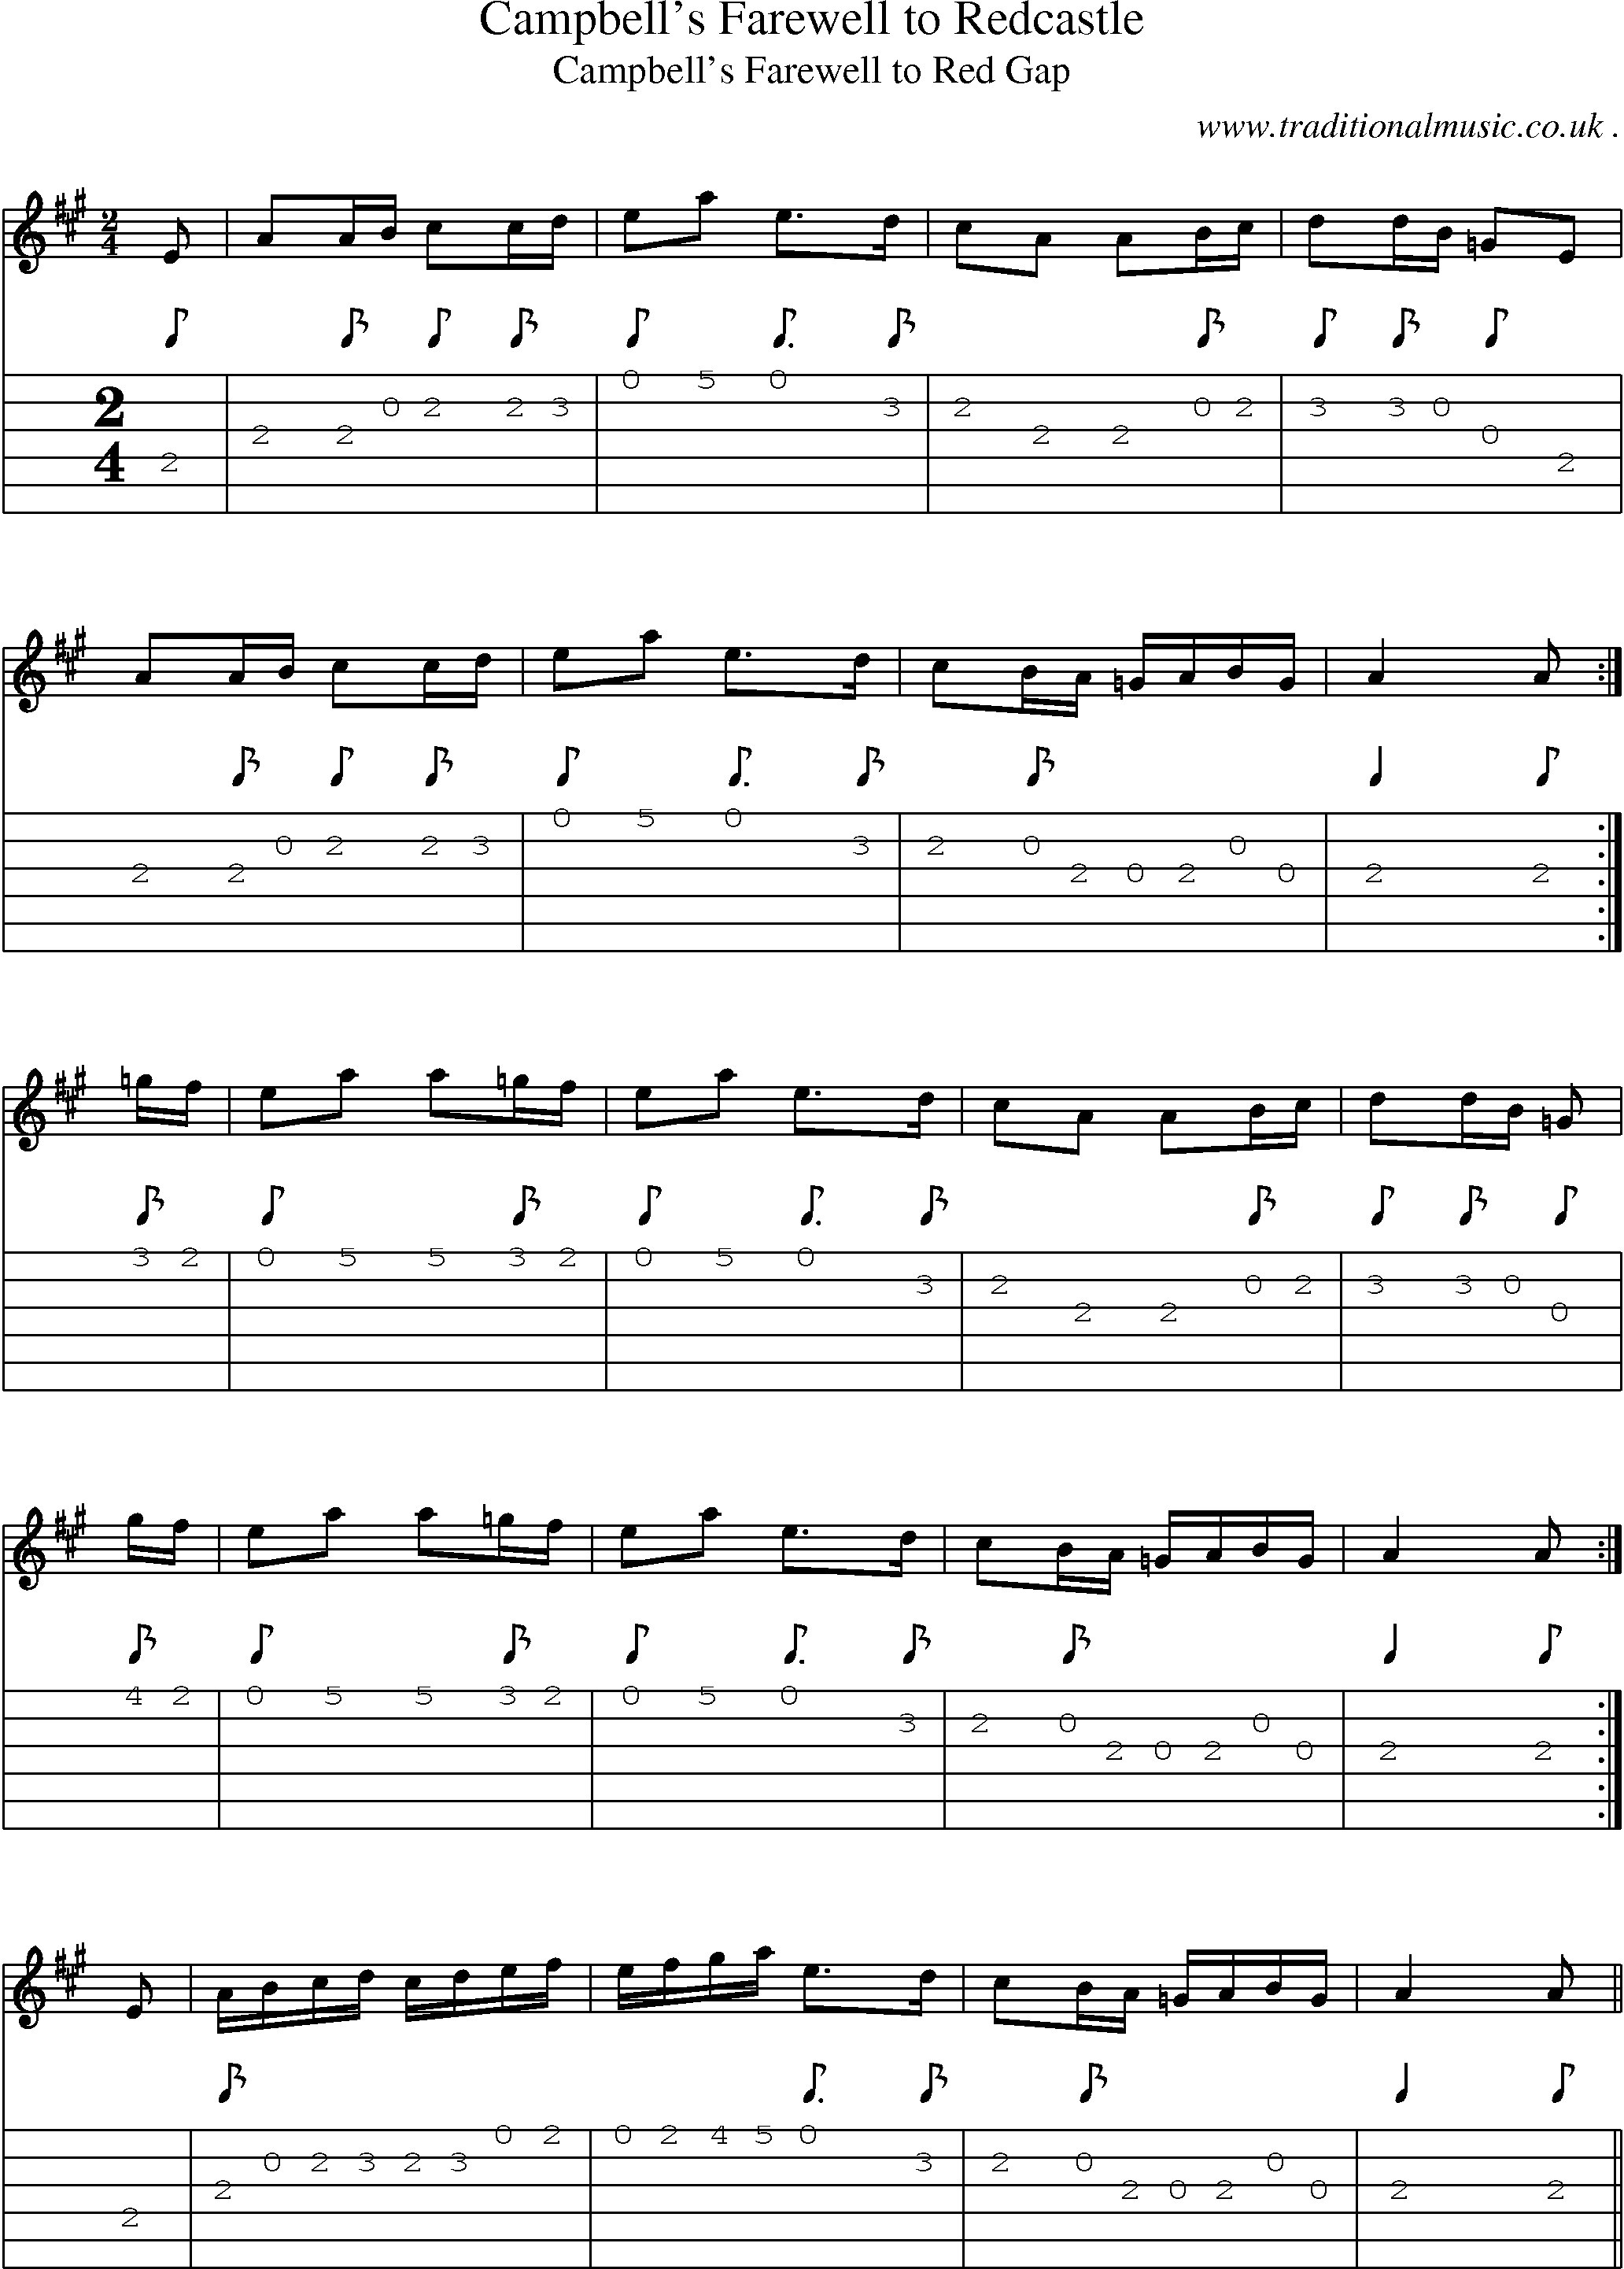 Music Score and Guitar Tabs for Campbells Farewell To Redcastle